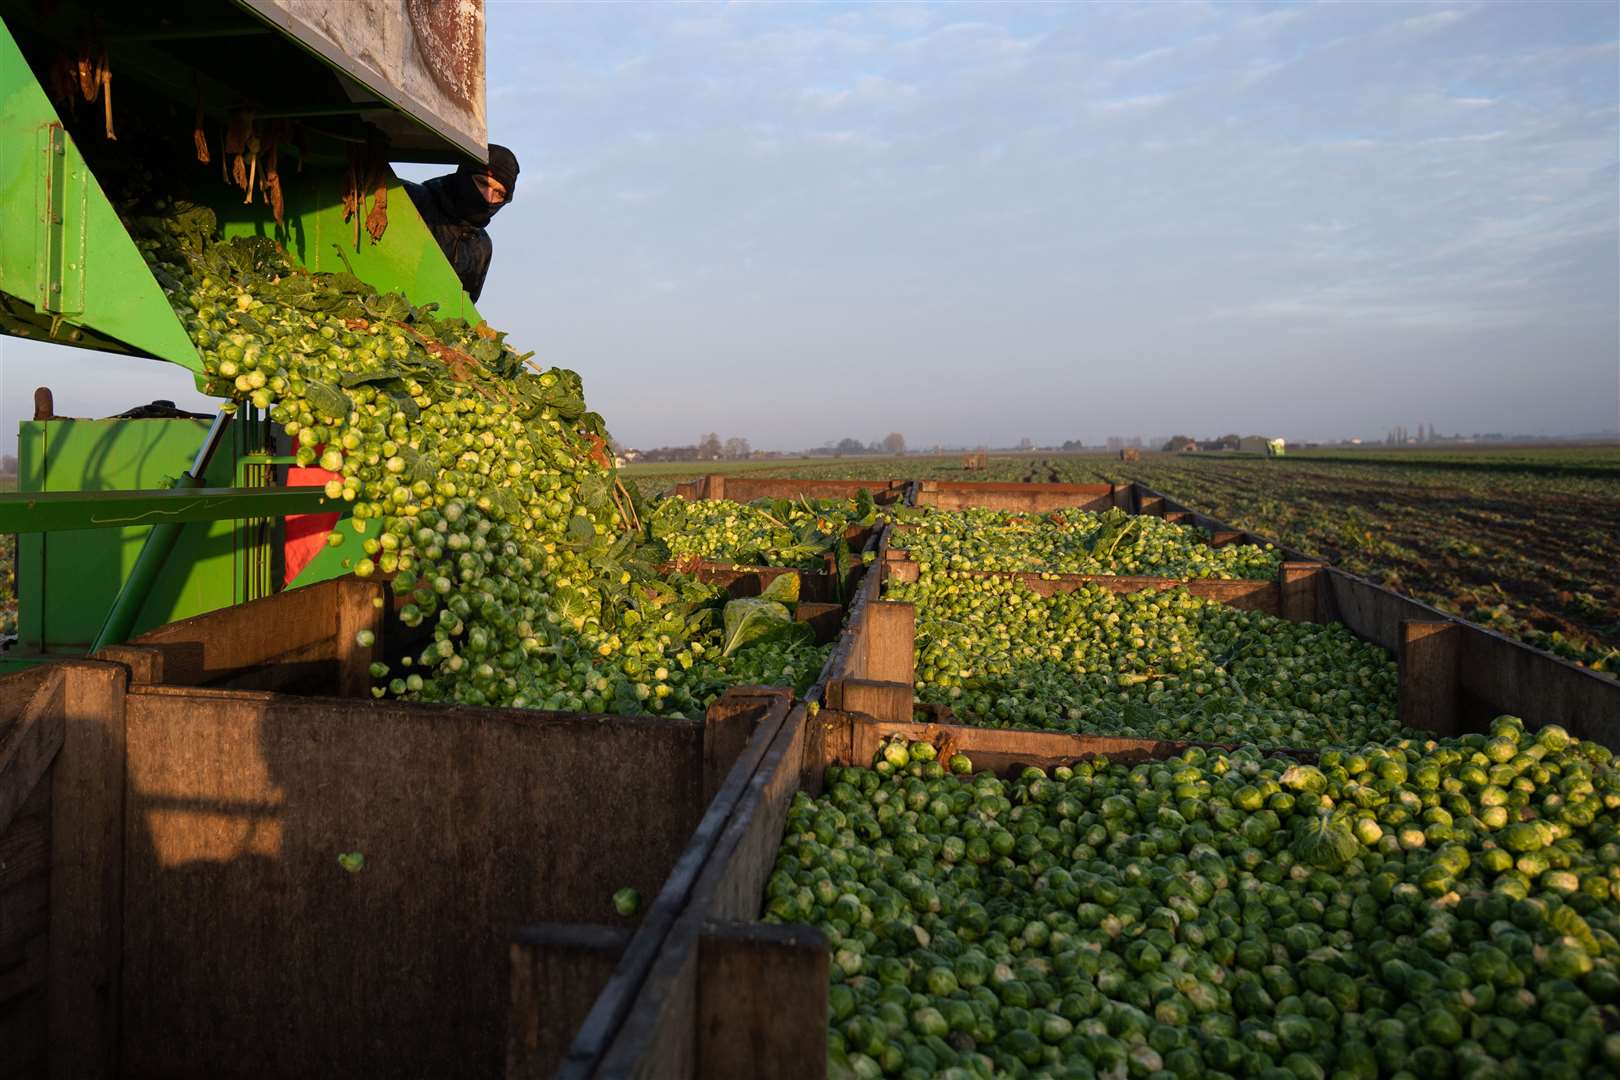 Brussels sprouts are harvested ahead of the busy Christmas period (Joe Giddens/PA)